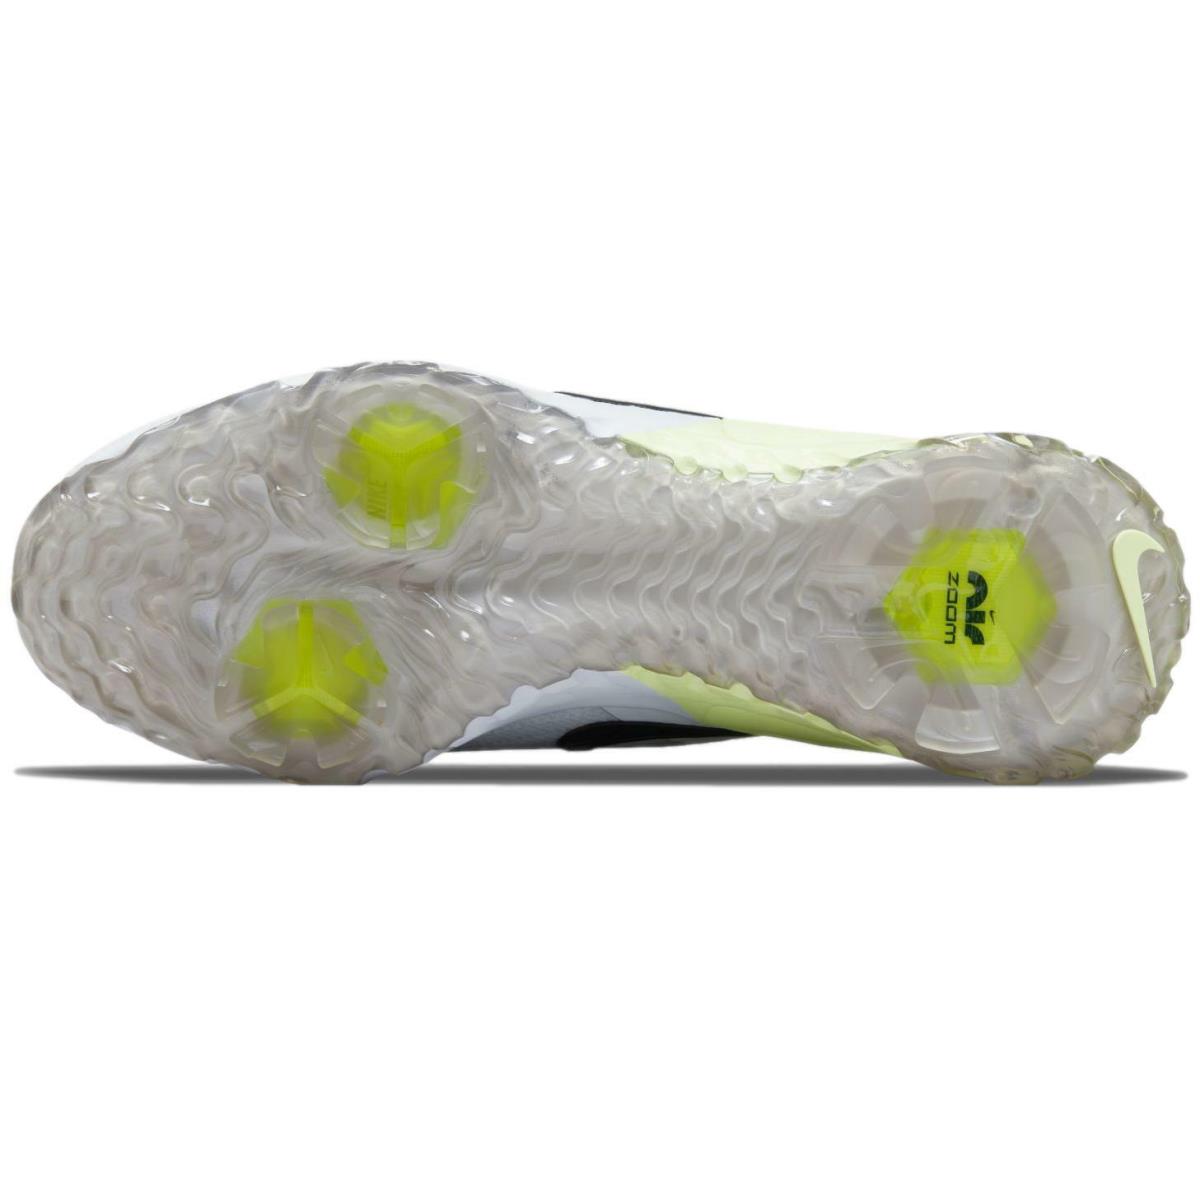 Nike shoes Air Zoom Infinity - White/Black-Barely Volt-Volt 1